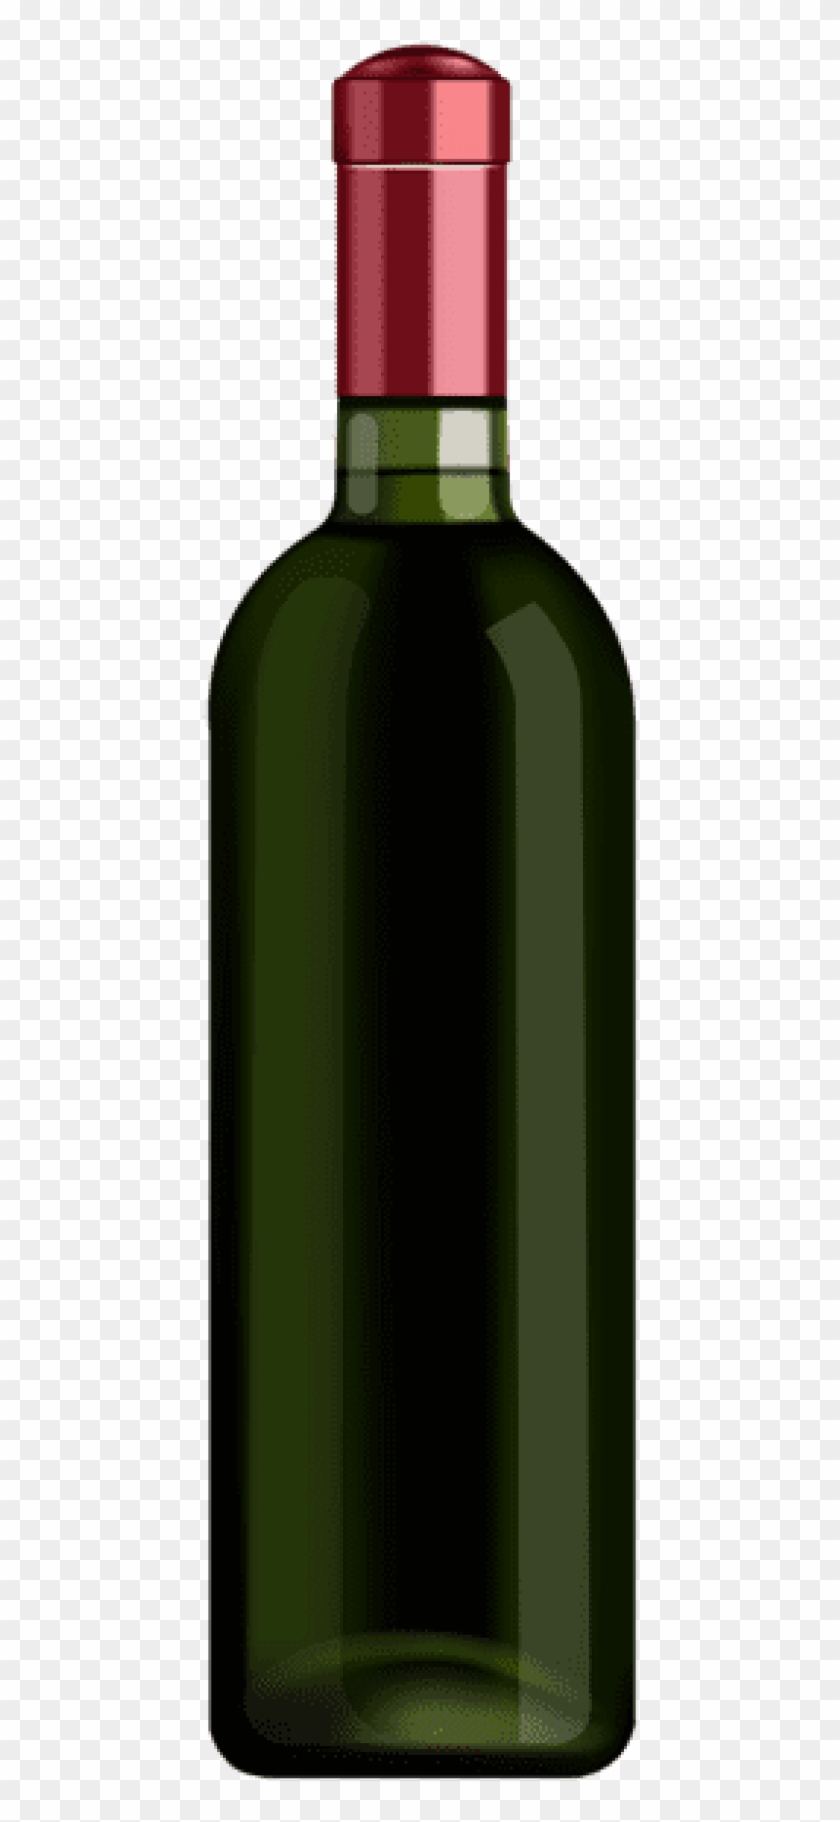 Free Png Download Wine Bottle Png Png Images Background Clipart #446624